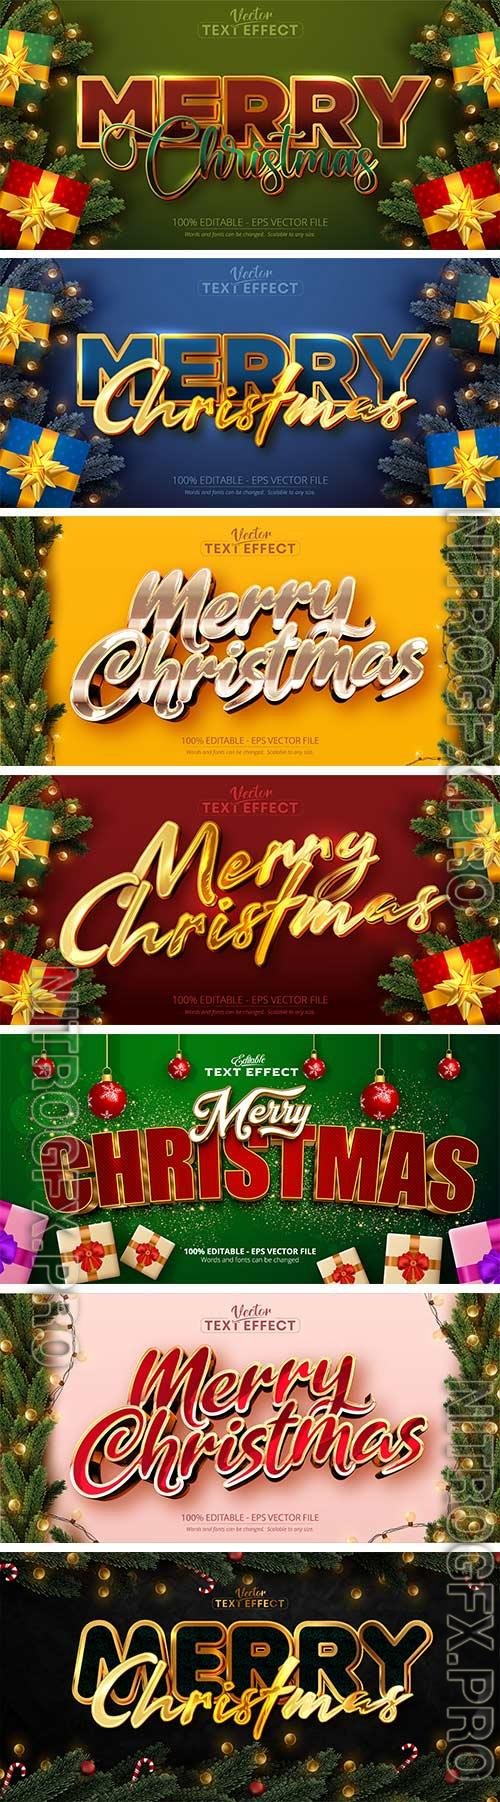 2022 New year and christmas editable text effect vector vol 24